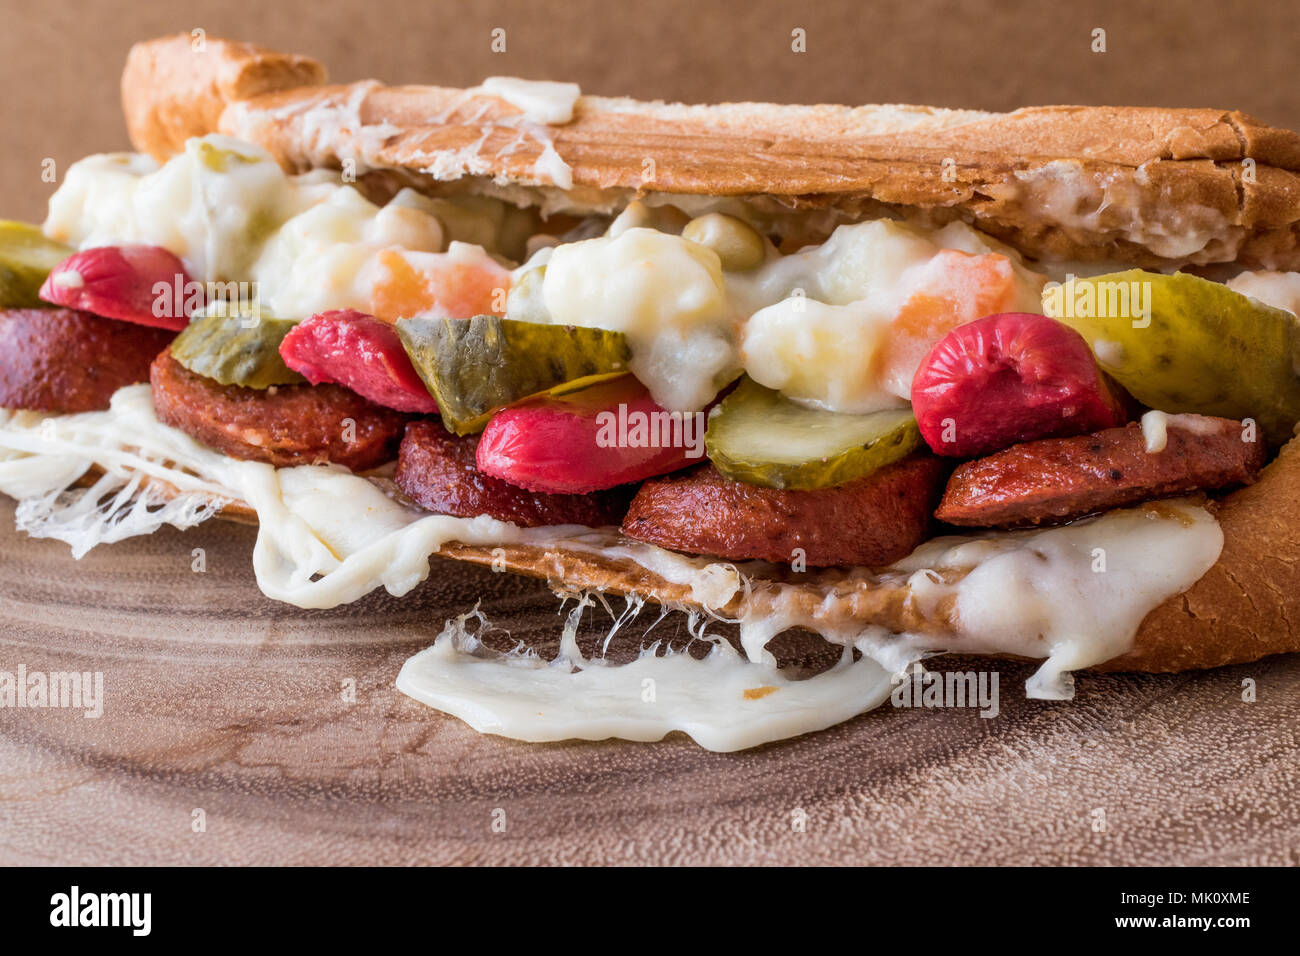 Turkish Toast Sandwich with Ham and Pickles called Ayvalik Tost / Tostu  Stock Photo - Alamy